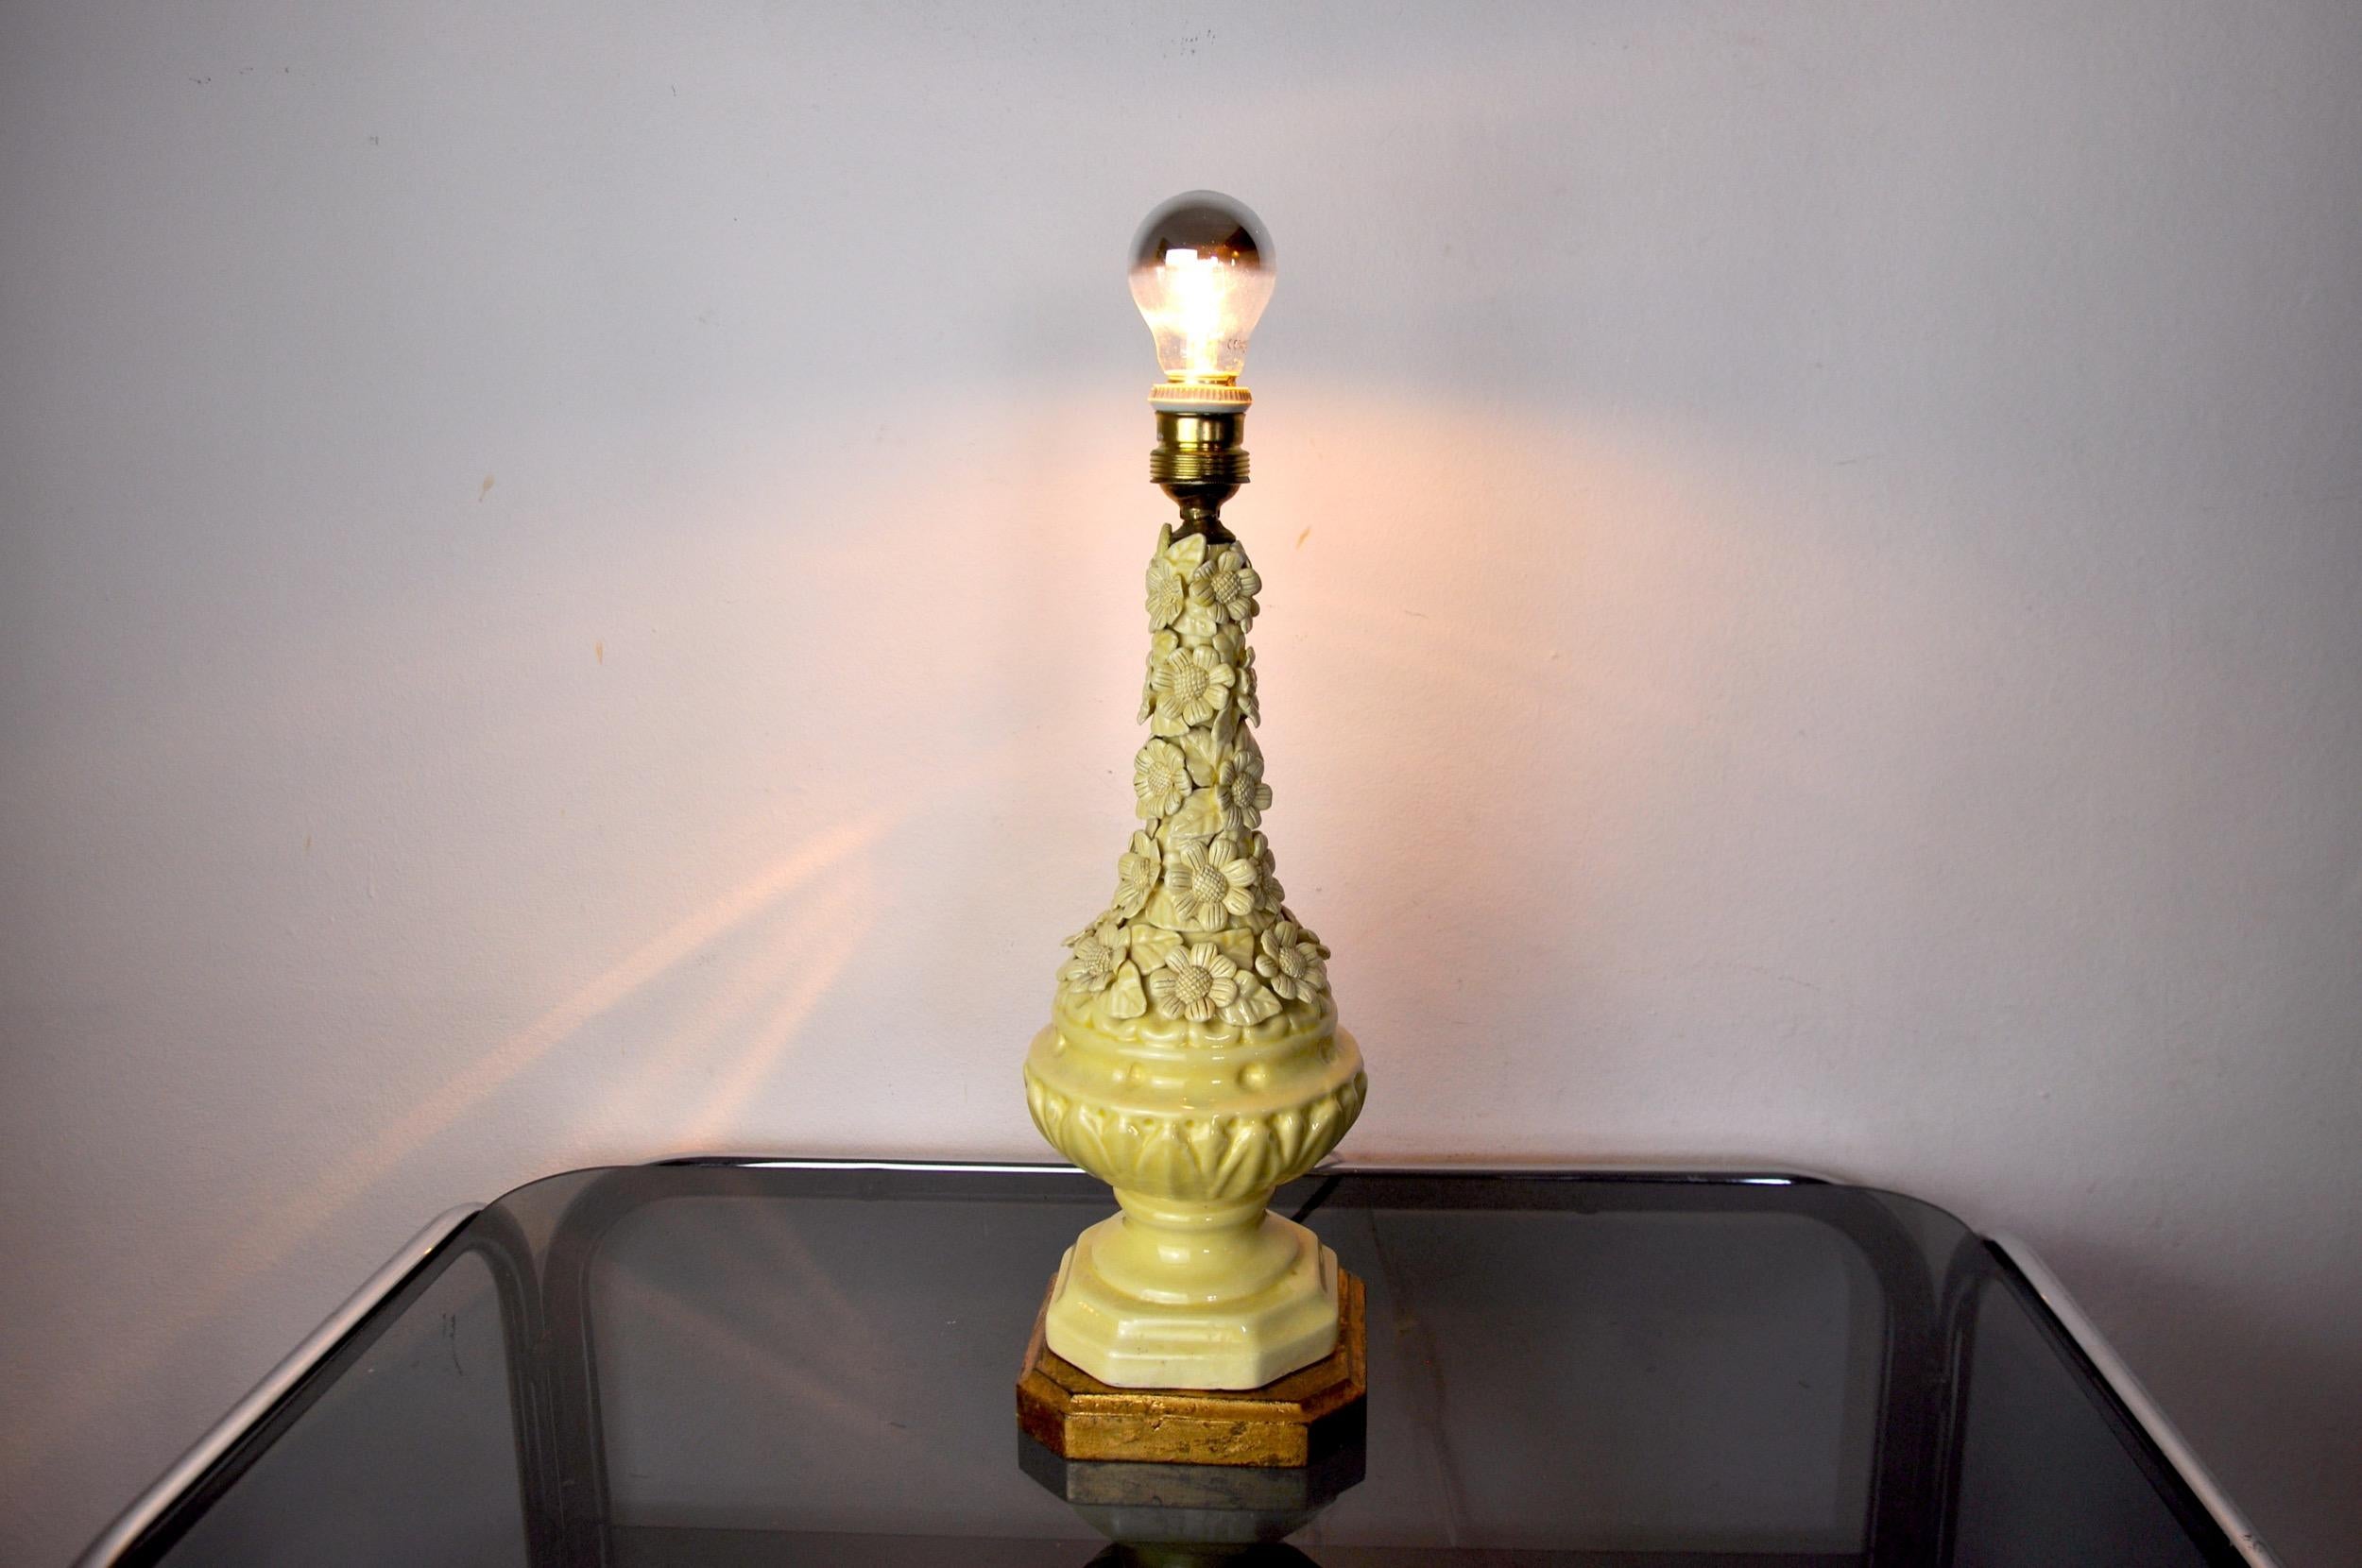 Very beautiful floral lamp produced by the house manises in the 70s in valencia, spain.

Wooden base and yellow ceramic floral base.

All floral details have been made and painted by hand.

Very nice state of conservation restoration on two